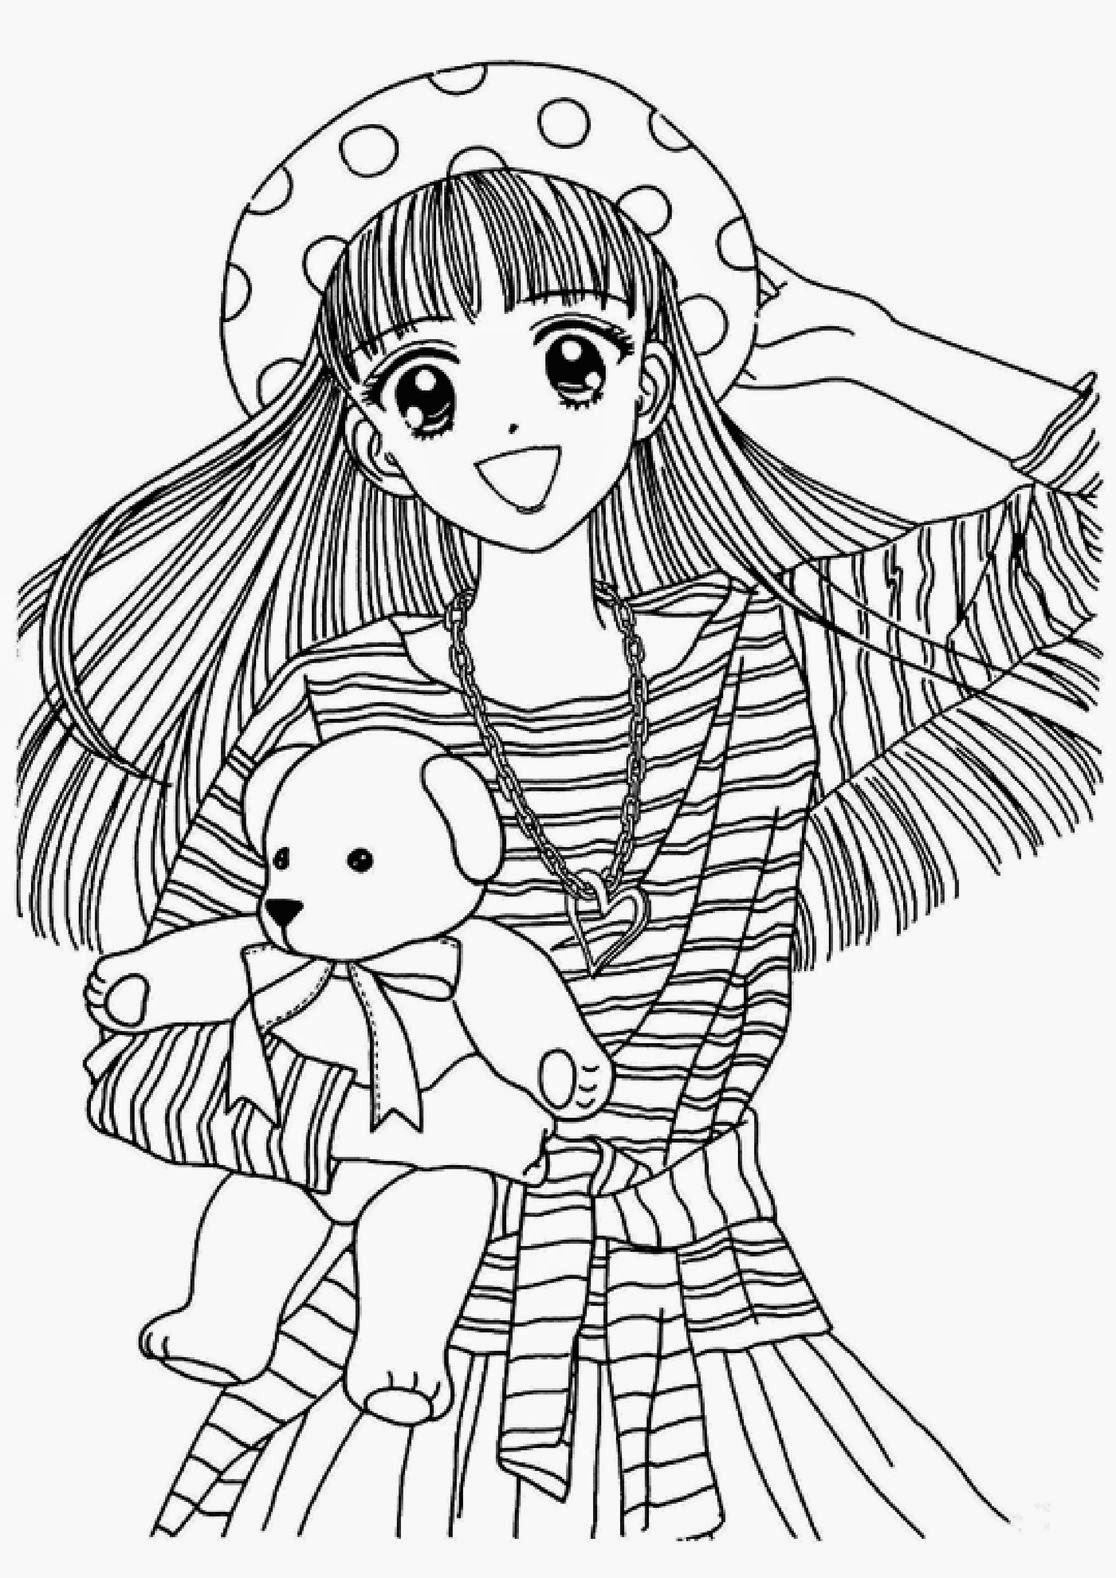 Download Coloring Pages: Anime Coloring Pages Free and Printable